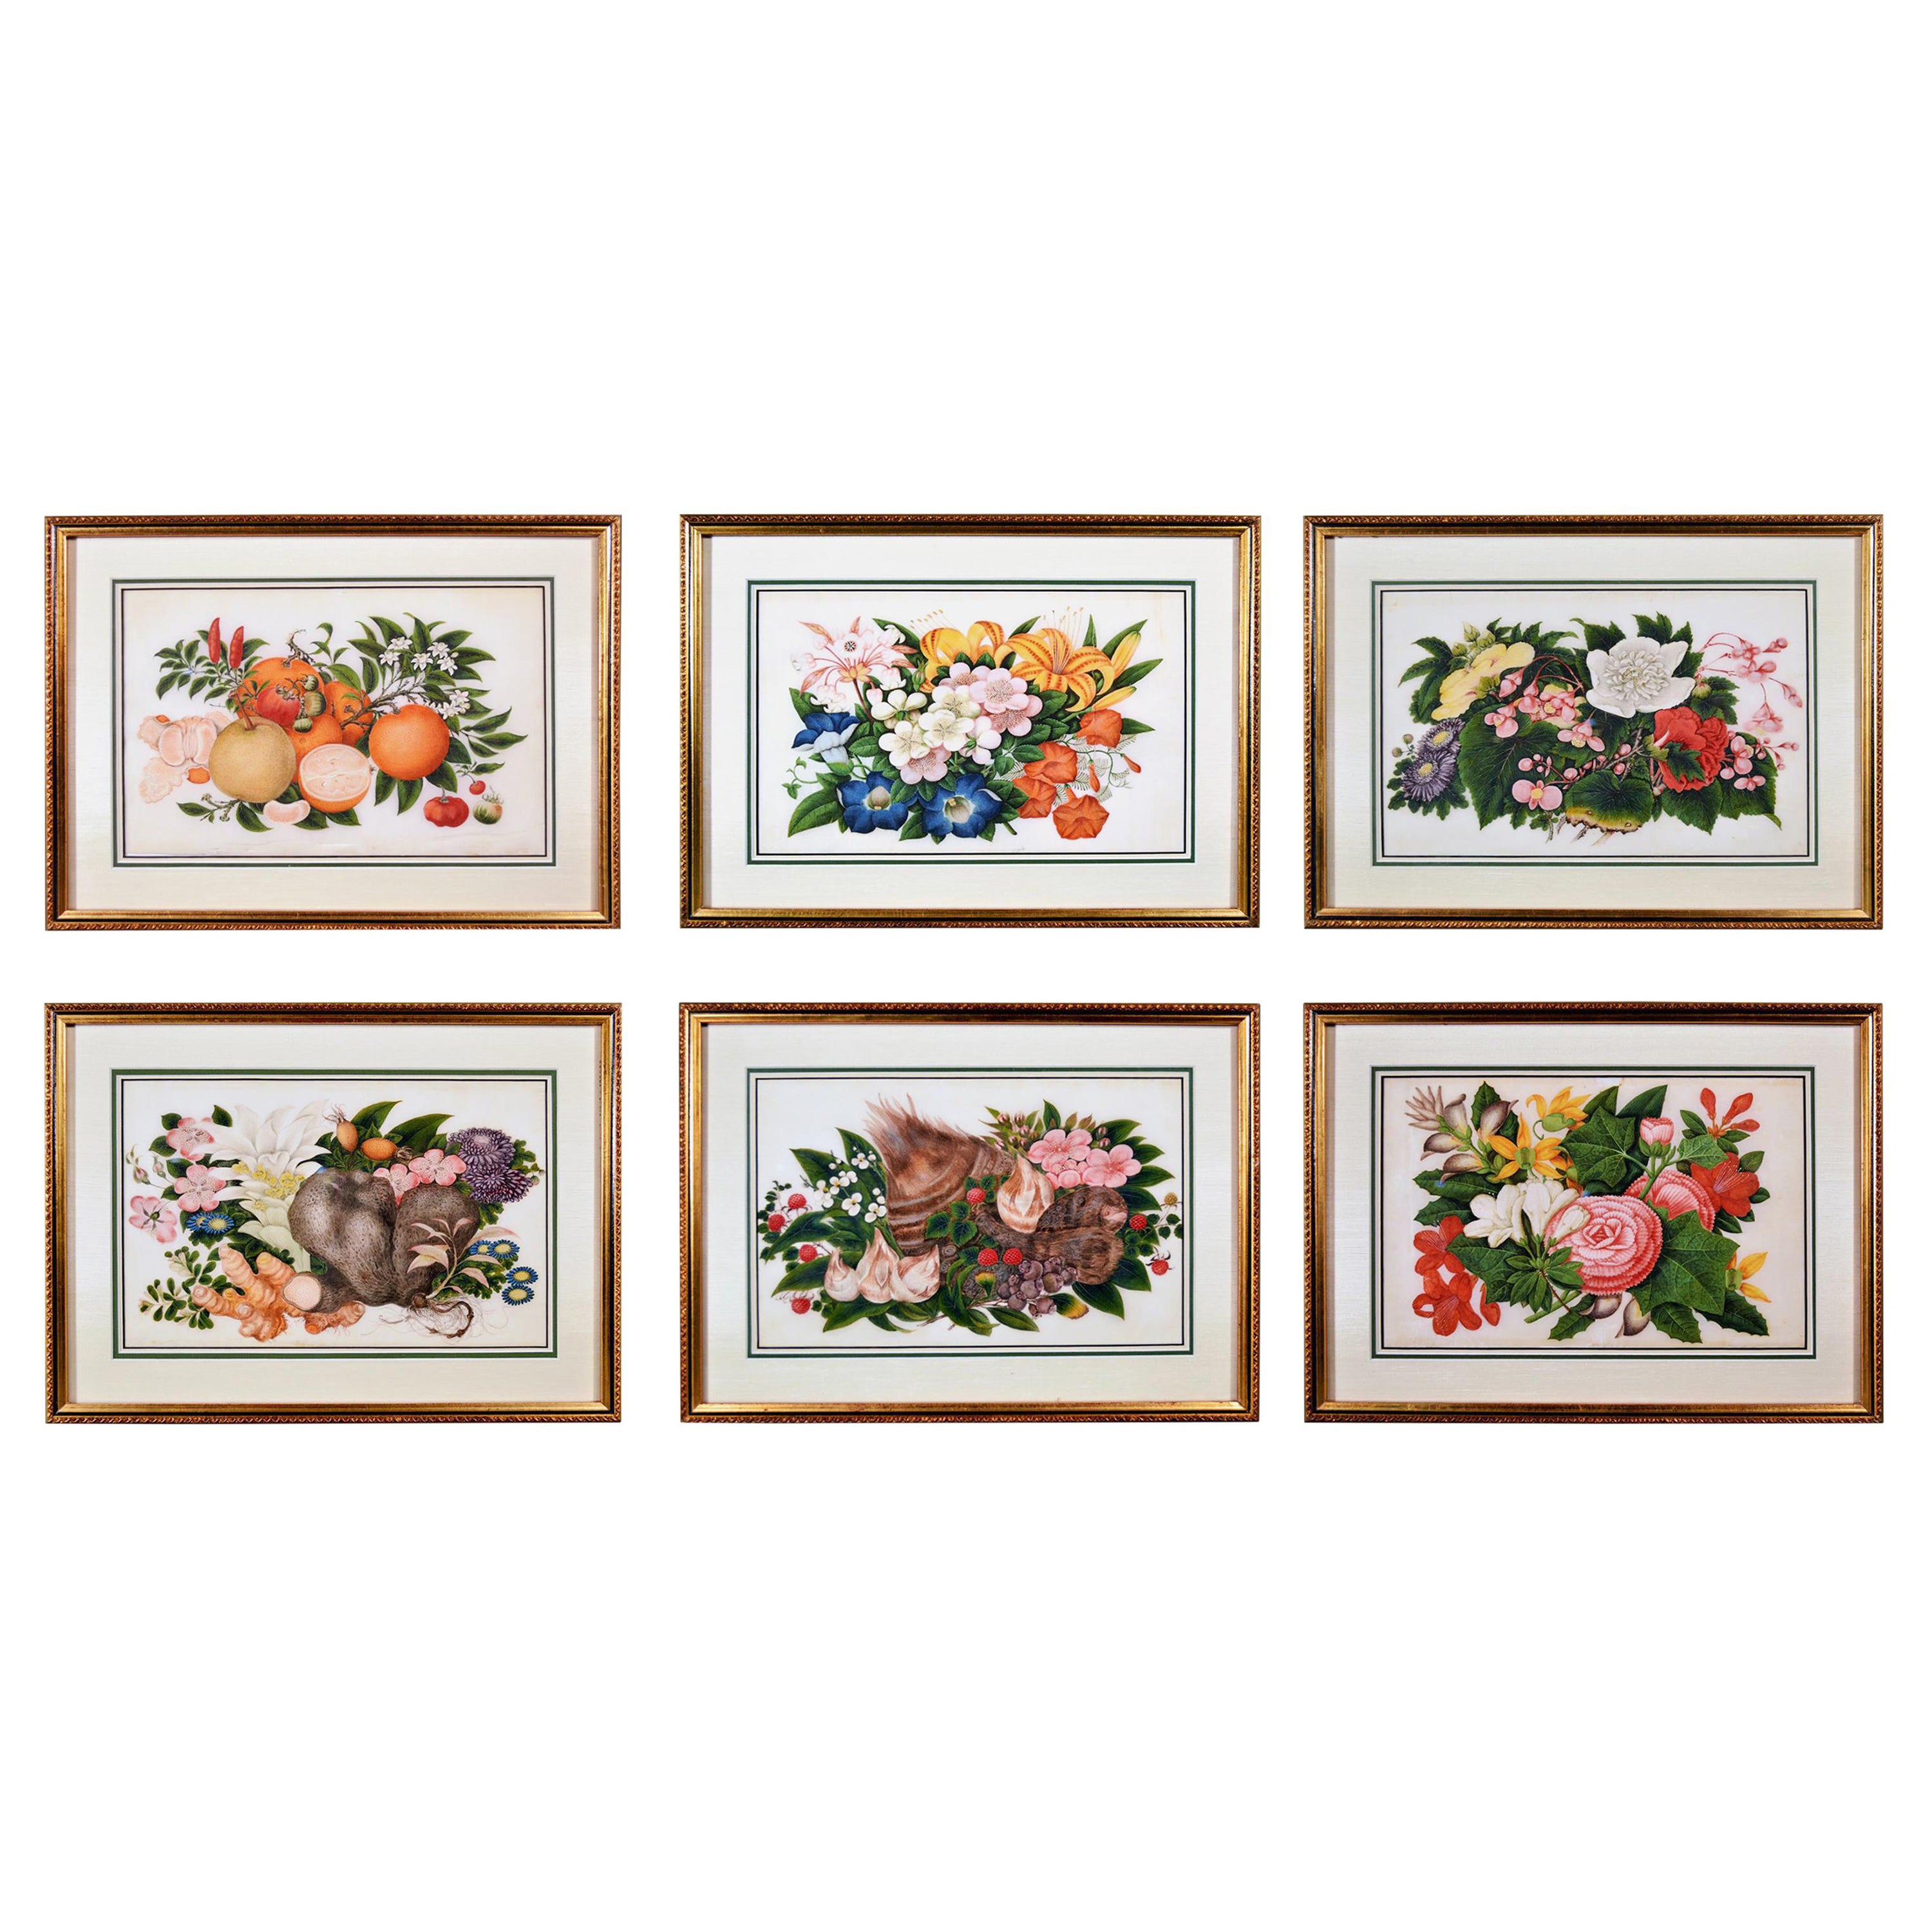 China Trade Set of Six Sunqua Still Life of Fruit & Flowers Paintings For Sale